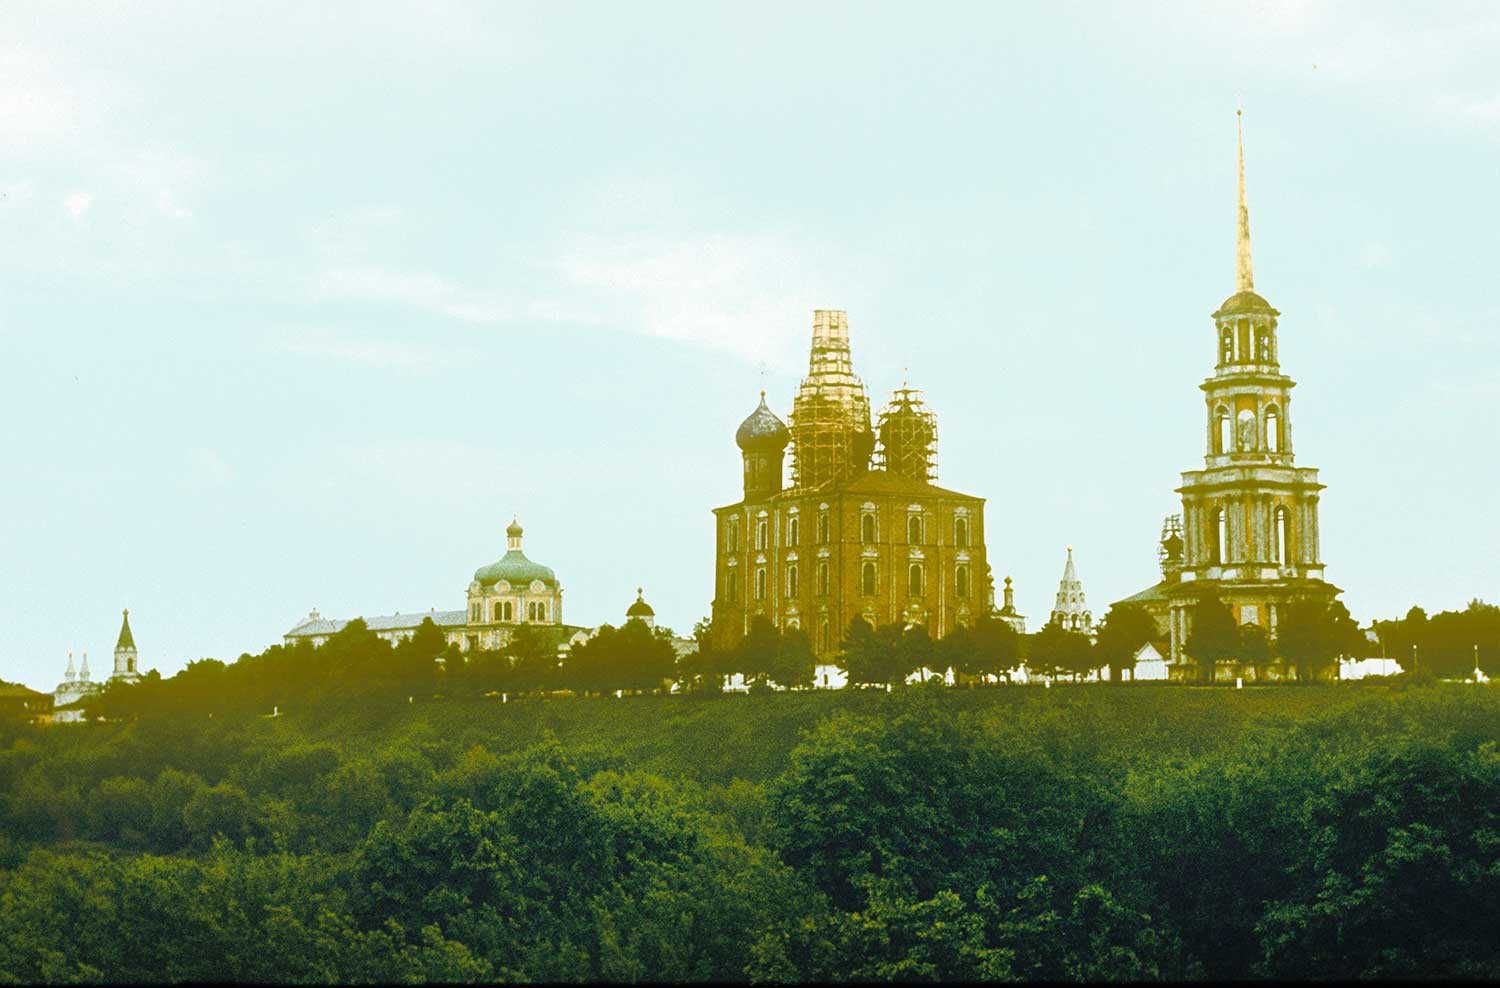 Ryazan Kremlin, northwest view. From left: Church of Holy Spirit, Archbishop's Palace, Cathedral of Nativity of Christ, Archangel Cathedral, Dormition Cathedral, Epiphany Church, Transfiguration Cathedral, bell tower. May 13, 1984.